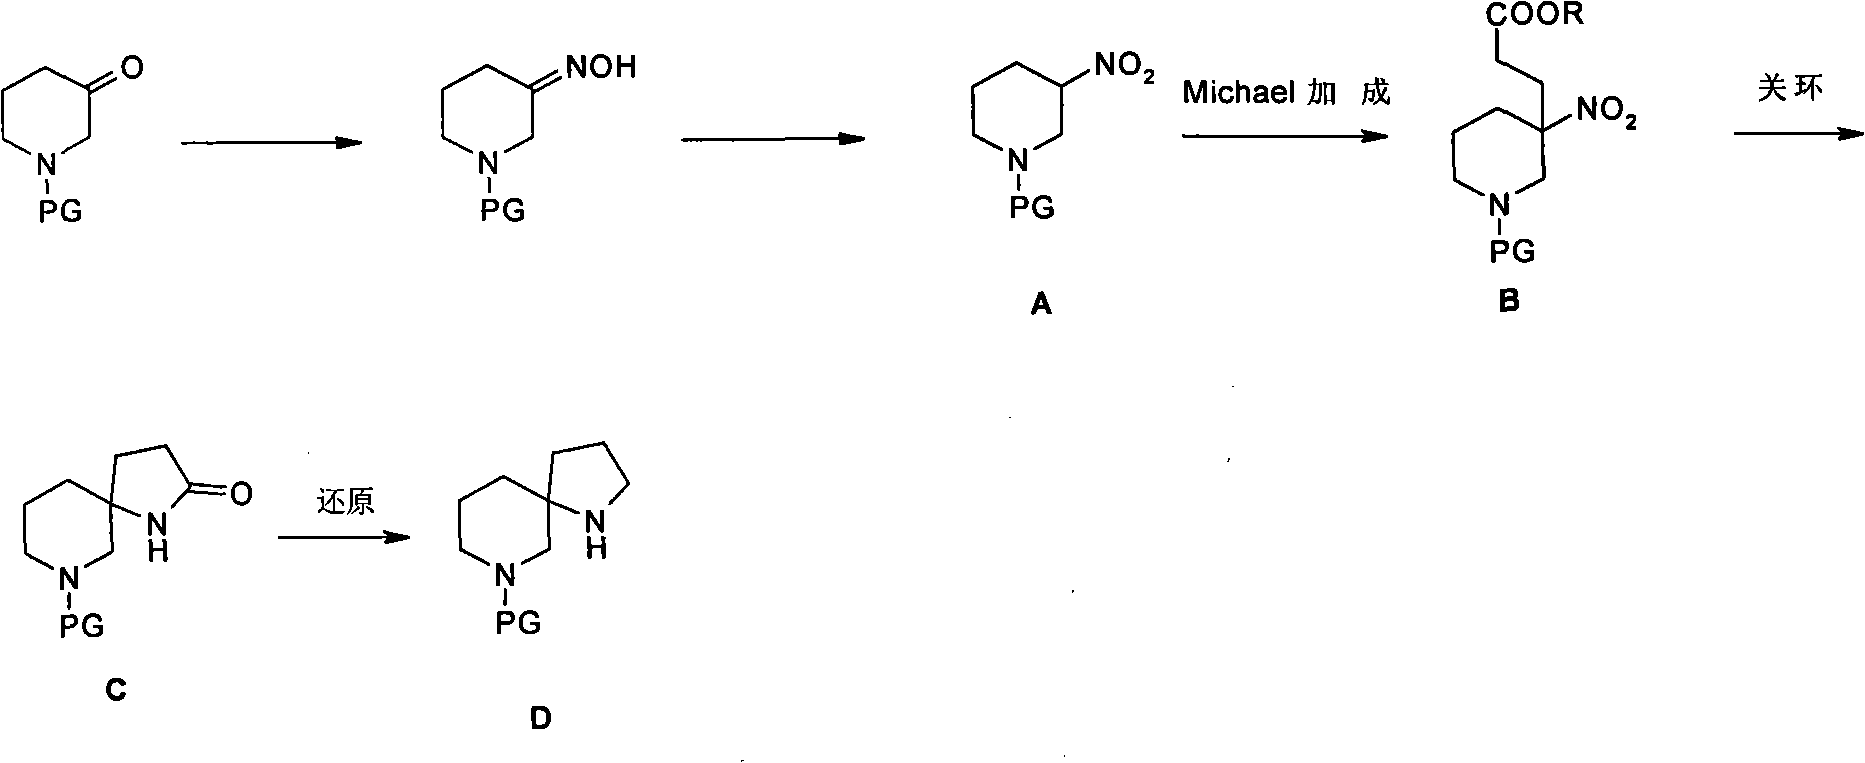 Method for synthesizing 1,7-diazaspiro[4.5]decane with protective group